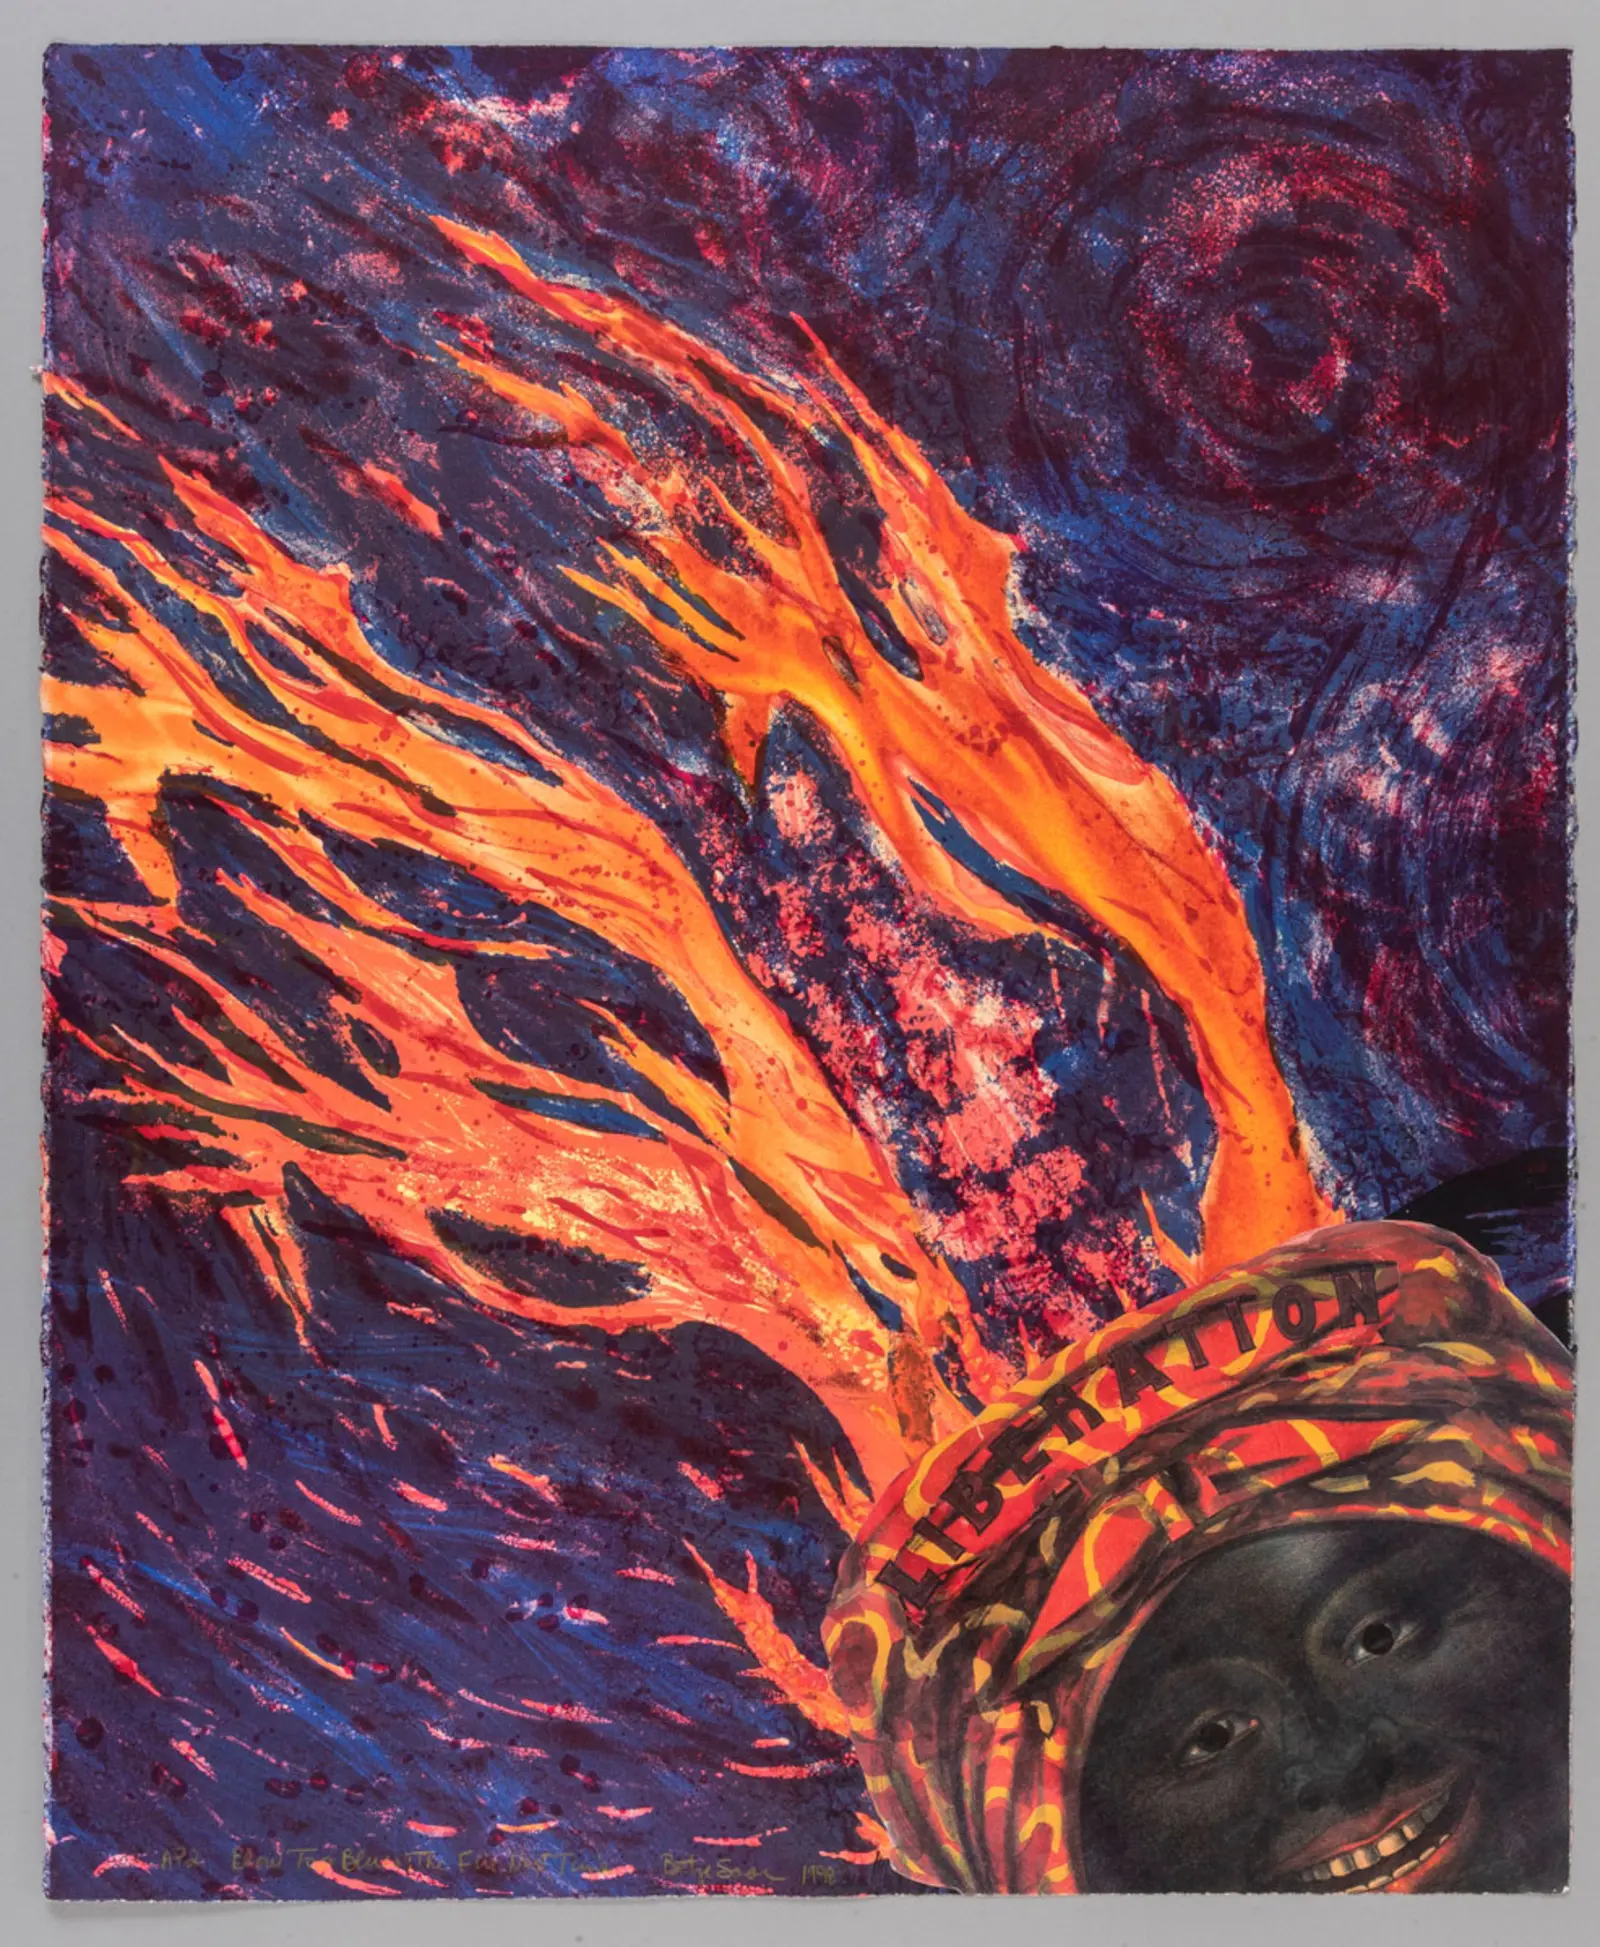 Lithograph of a black woman wearing a bandana featuring the word LIBERATION as bright flames shoot out of it on a dark blue and purple background.